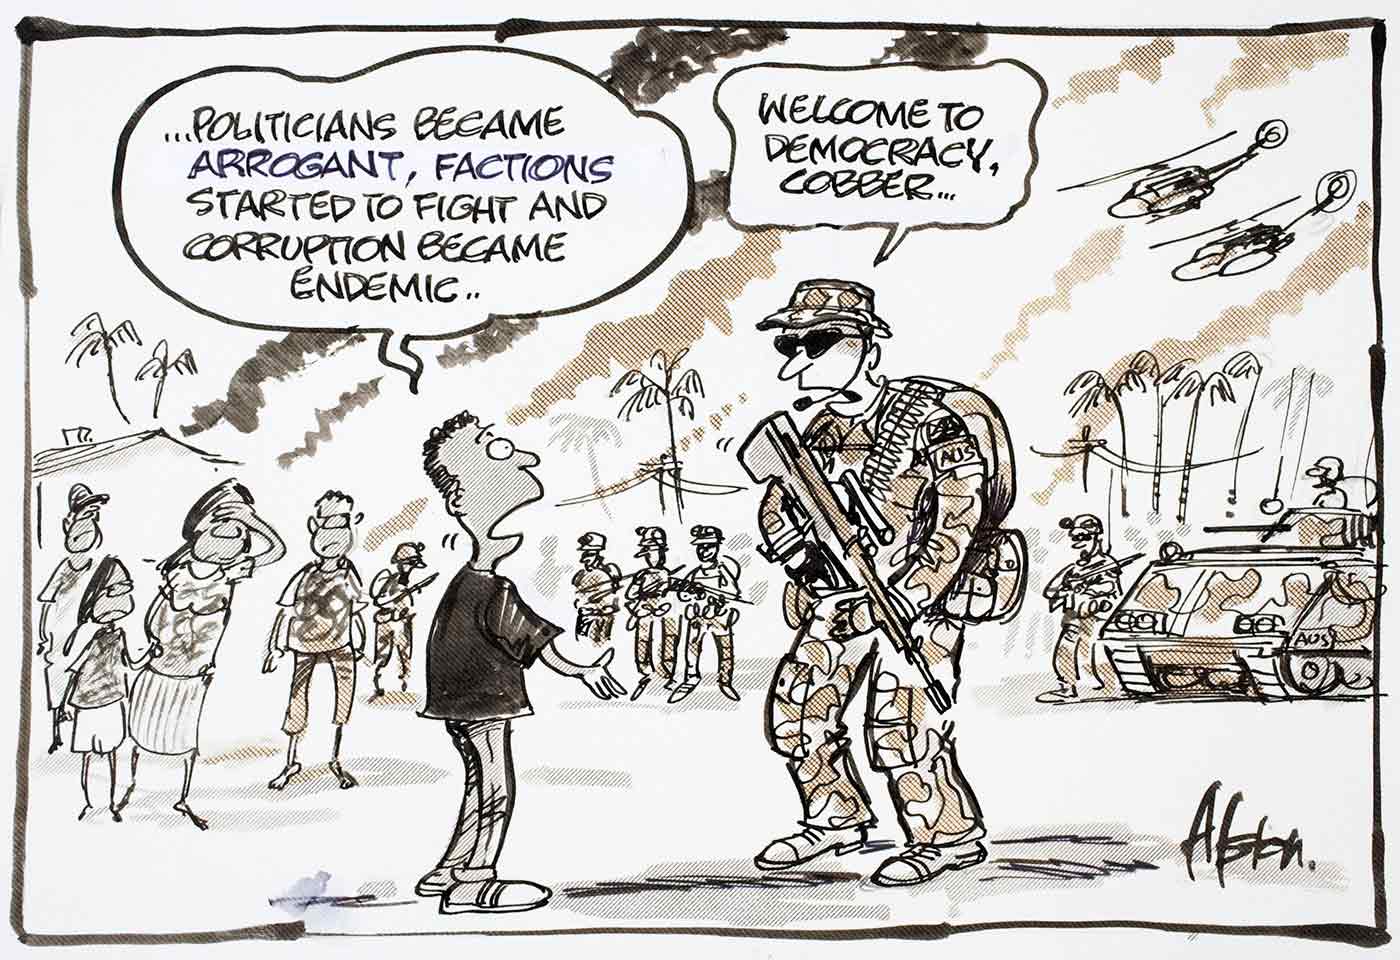 Political cartoon of a man telling an Australian soldier '...Politicians became arrogant, factions started to fight and corruption became endemic ...' - to which the soldier responds, 'Welcome to democracy cobber.' - click to view larger image